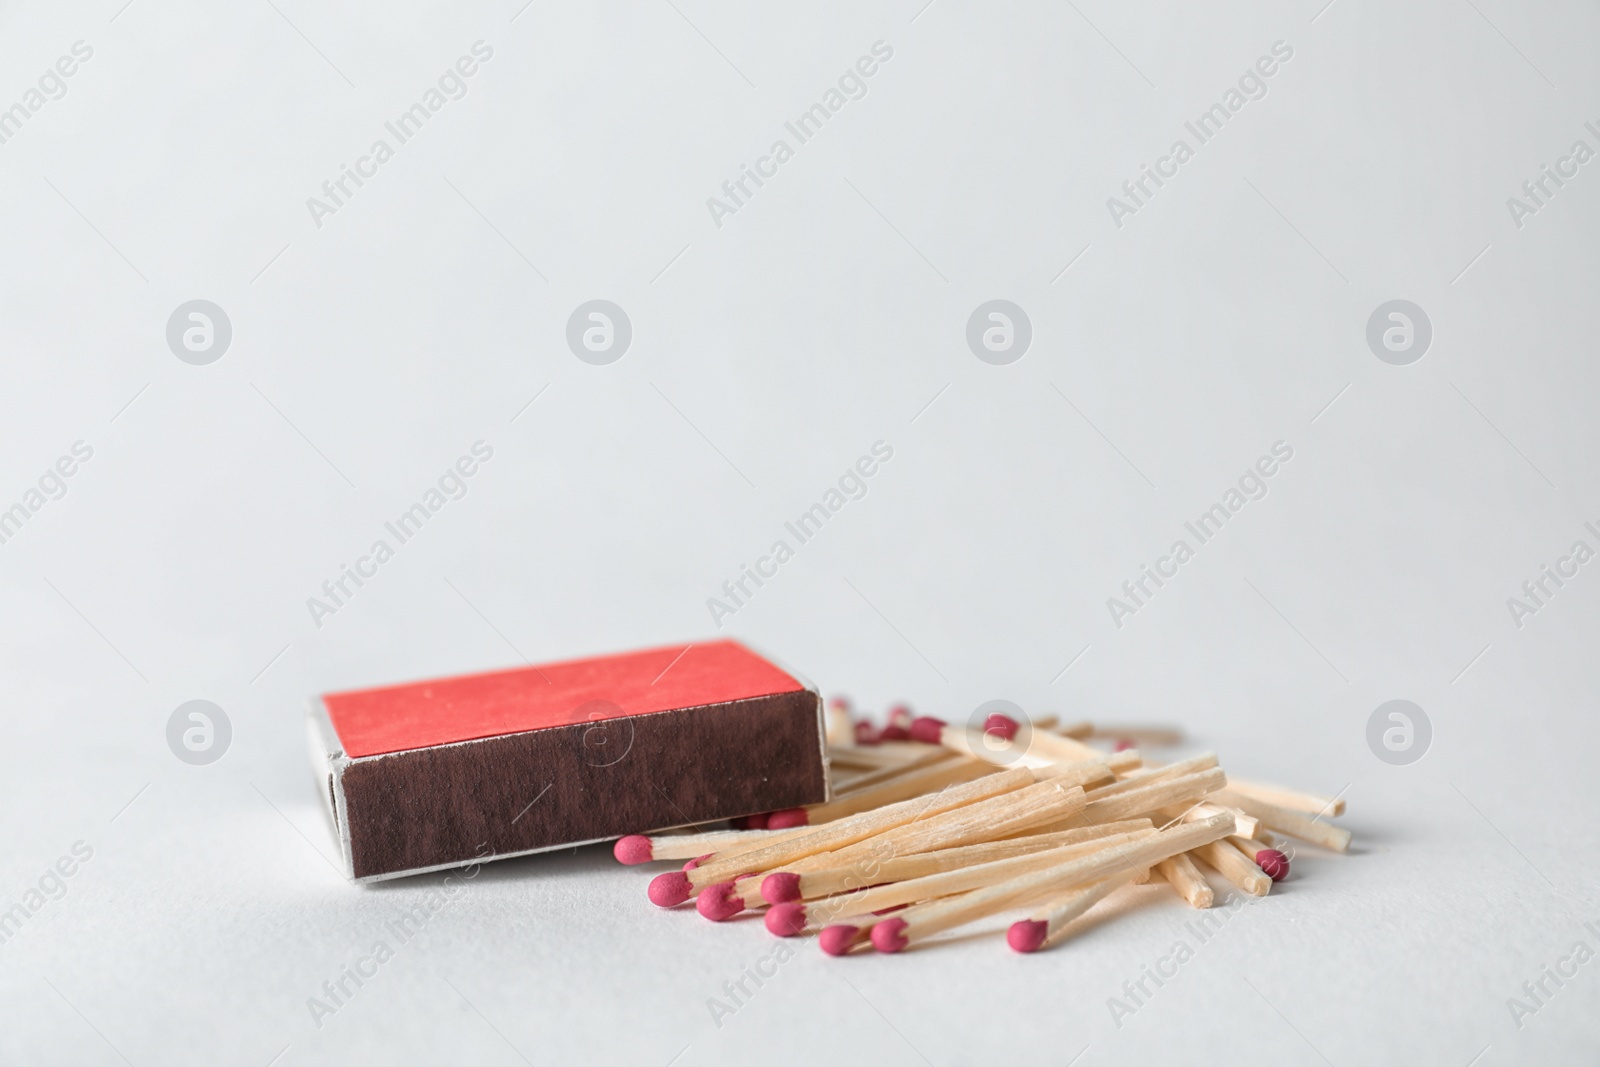 Photo of Cardboard box and matches on light background